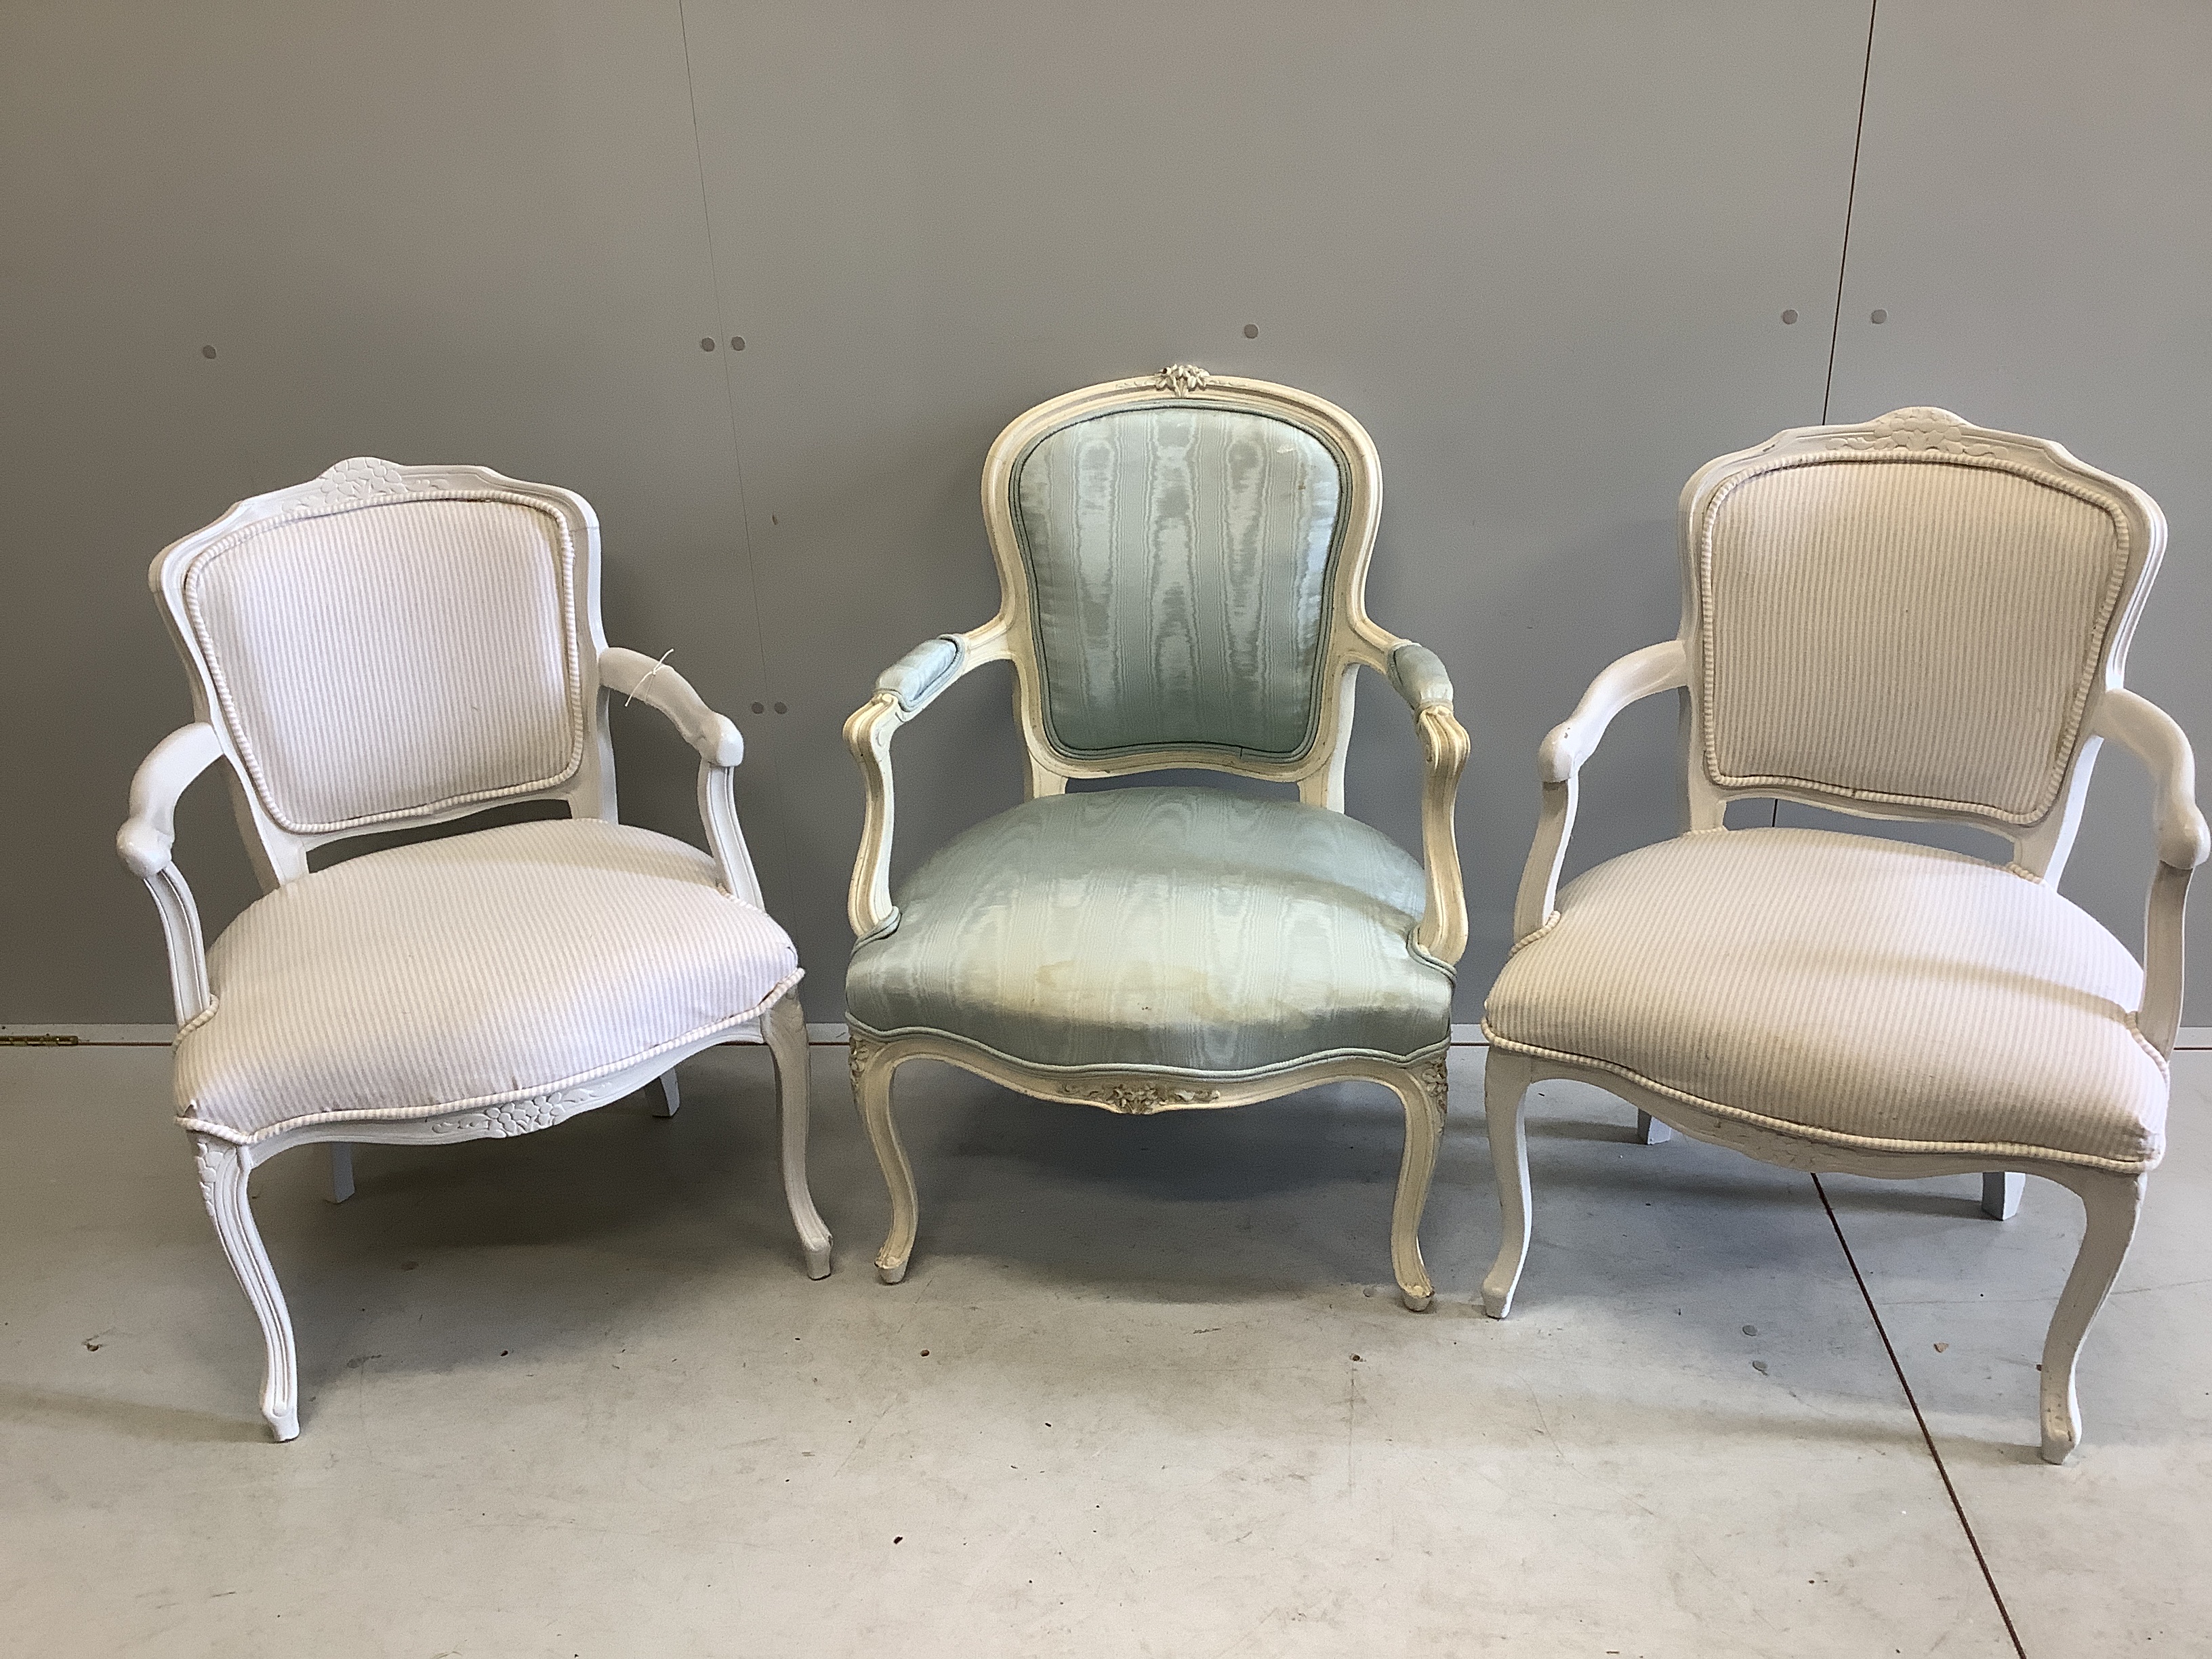 A pair of French style painted fauteuil, width 58cm, depth 48cm, height 80cm together with one other similar chair                                                                                                          